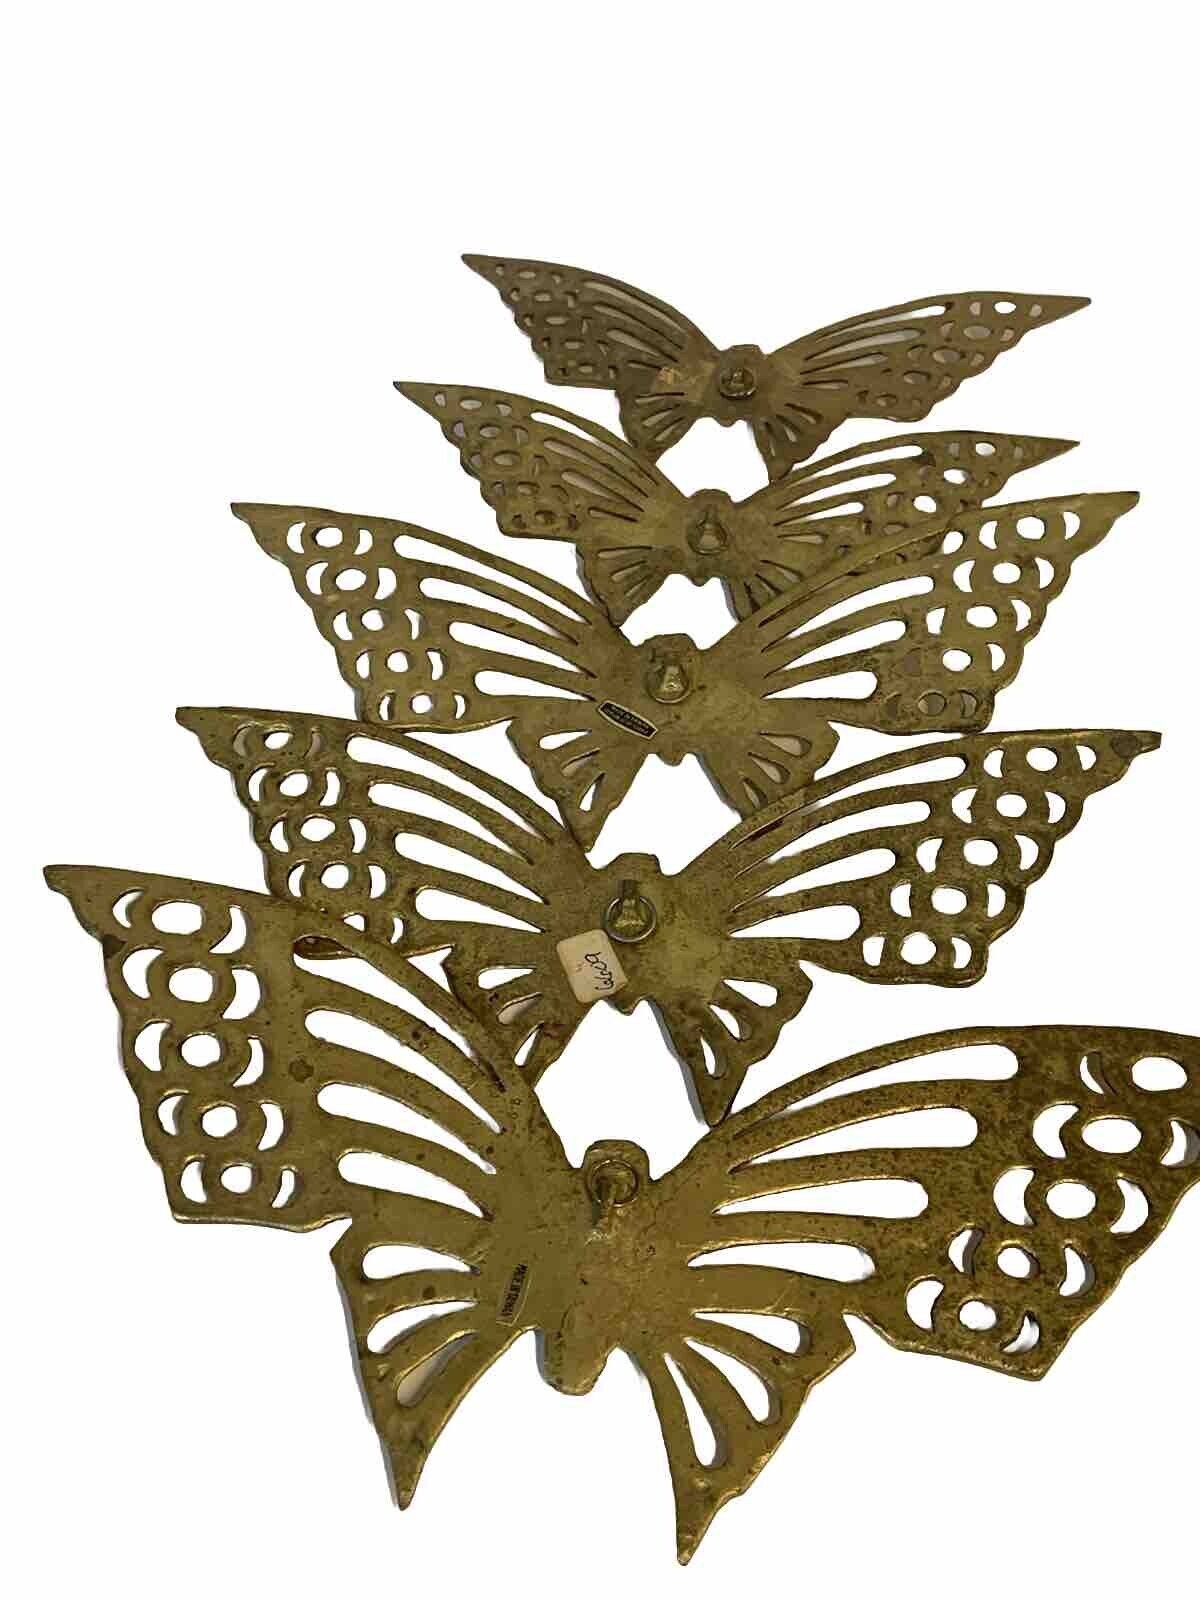 Rare Vintage Graduated Brass Butterfly Set of 5 Wall Plaques Hanging MCM